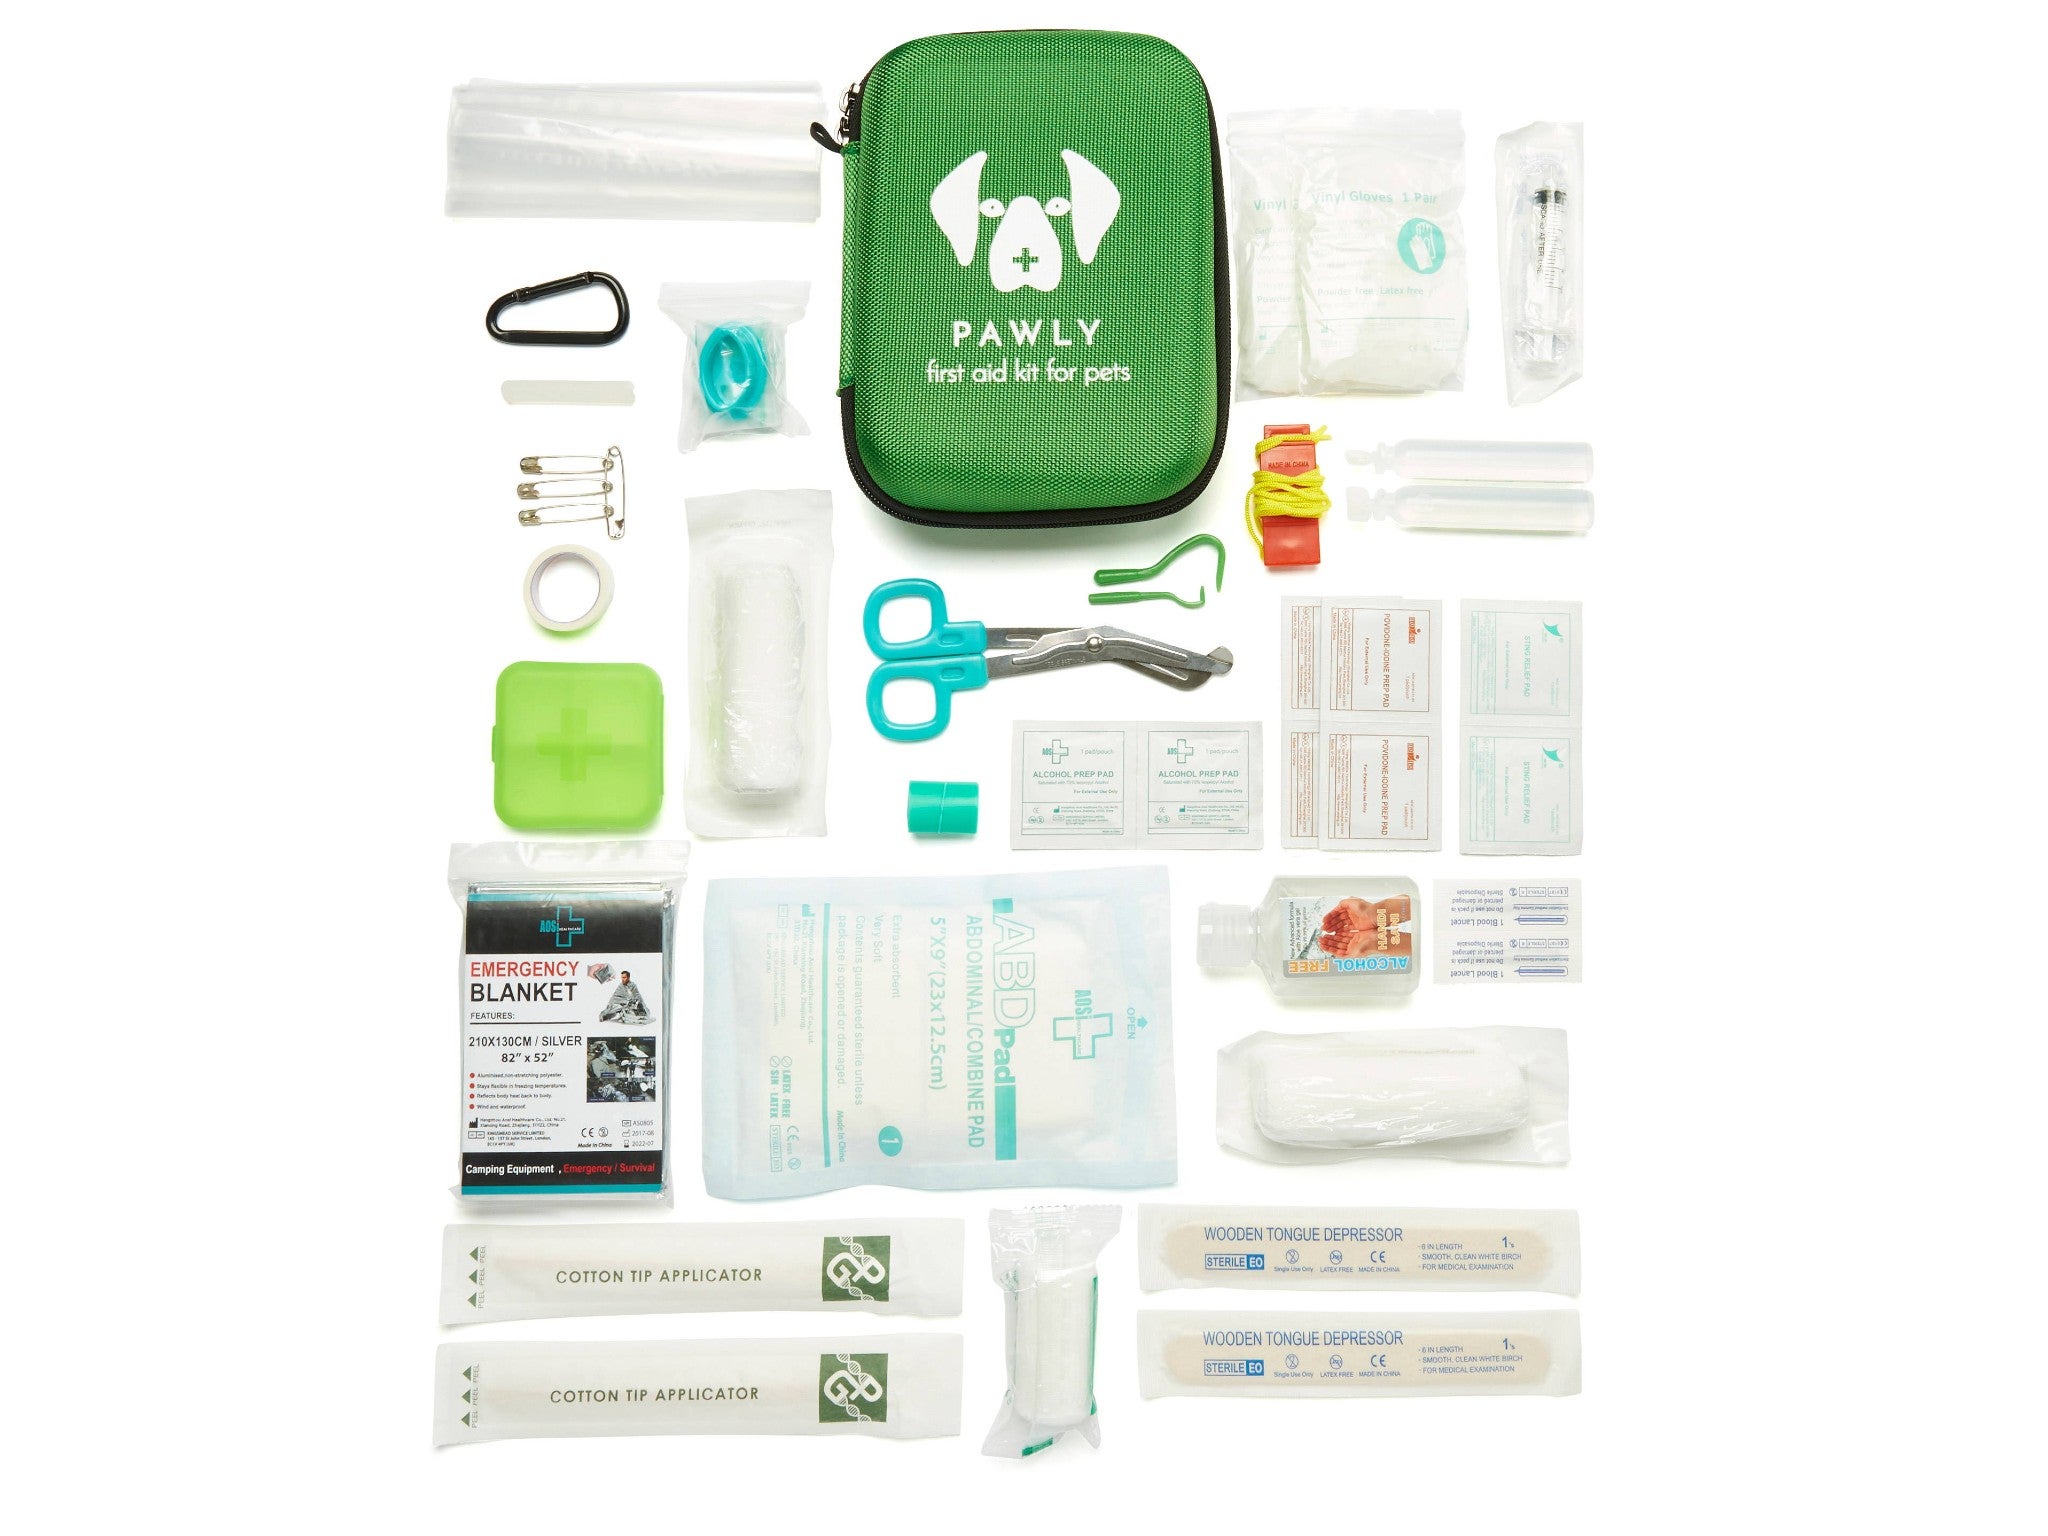 Pawly First Aid Kit for Pets indybest.jpg